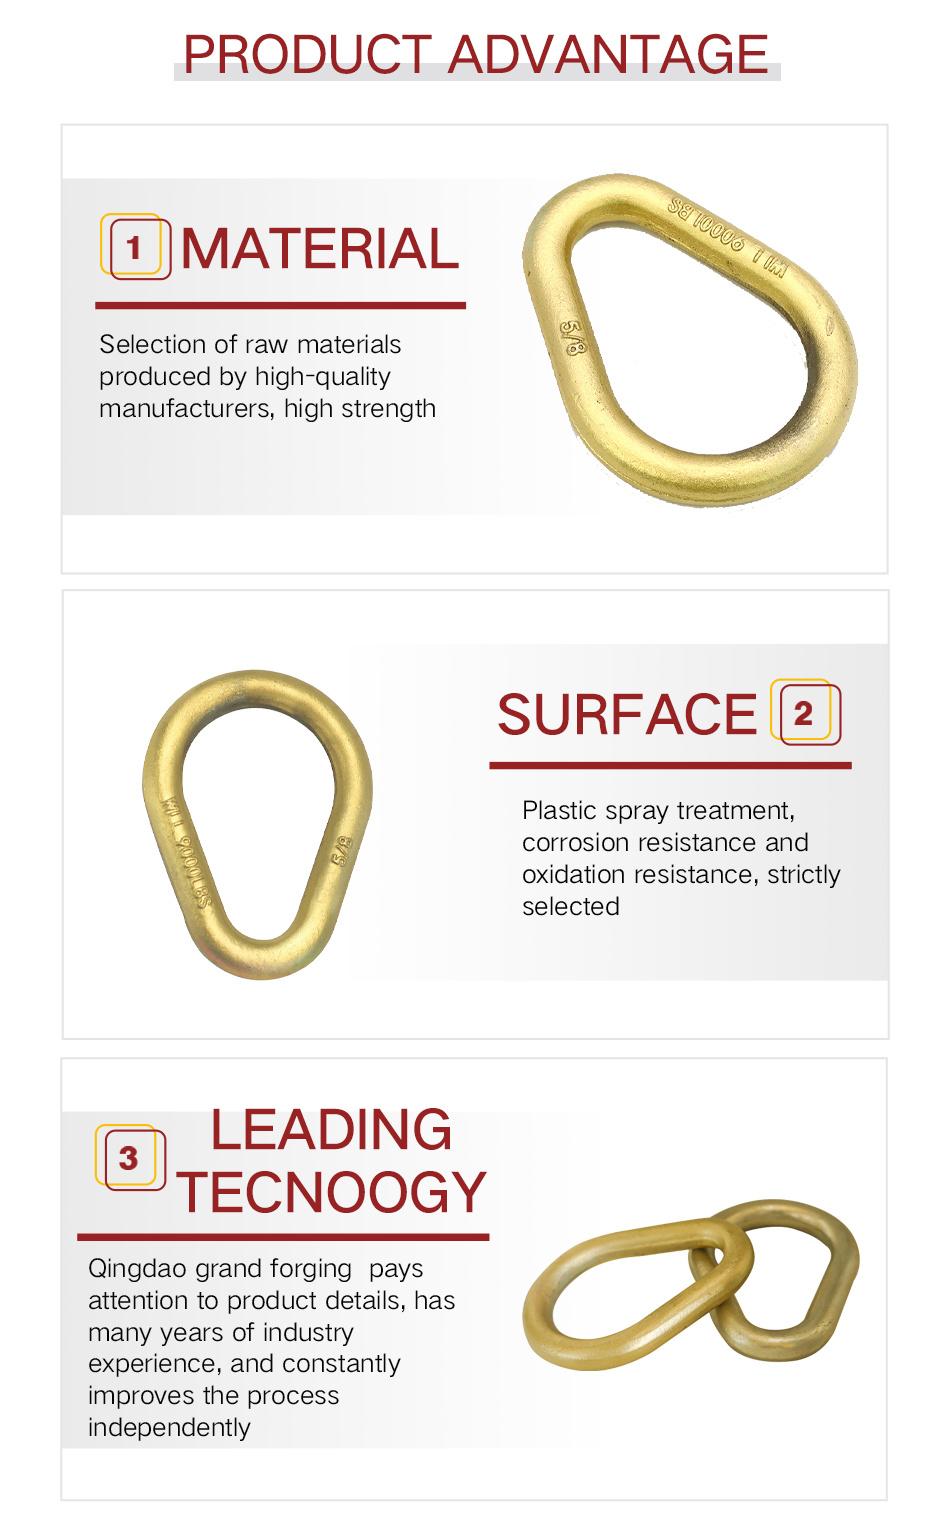 Factory Direct Chain Accessories Pear-Shaped Rings